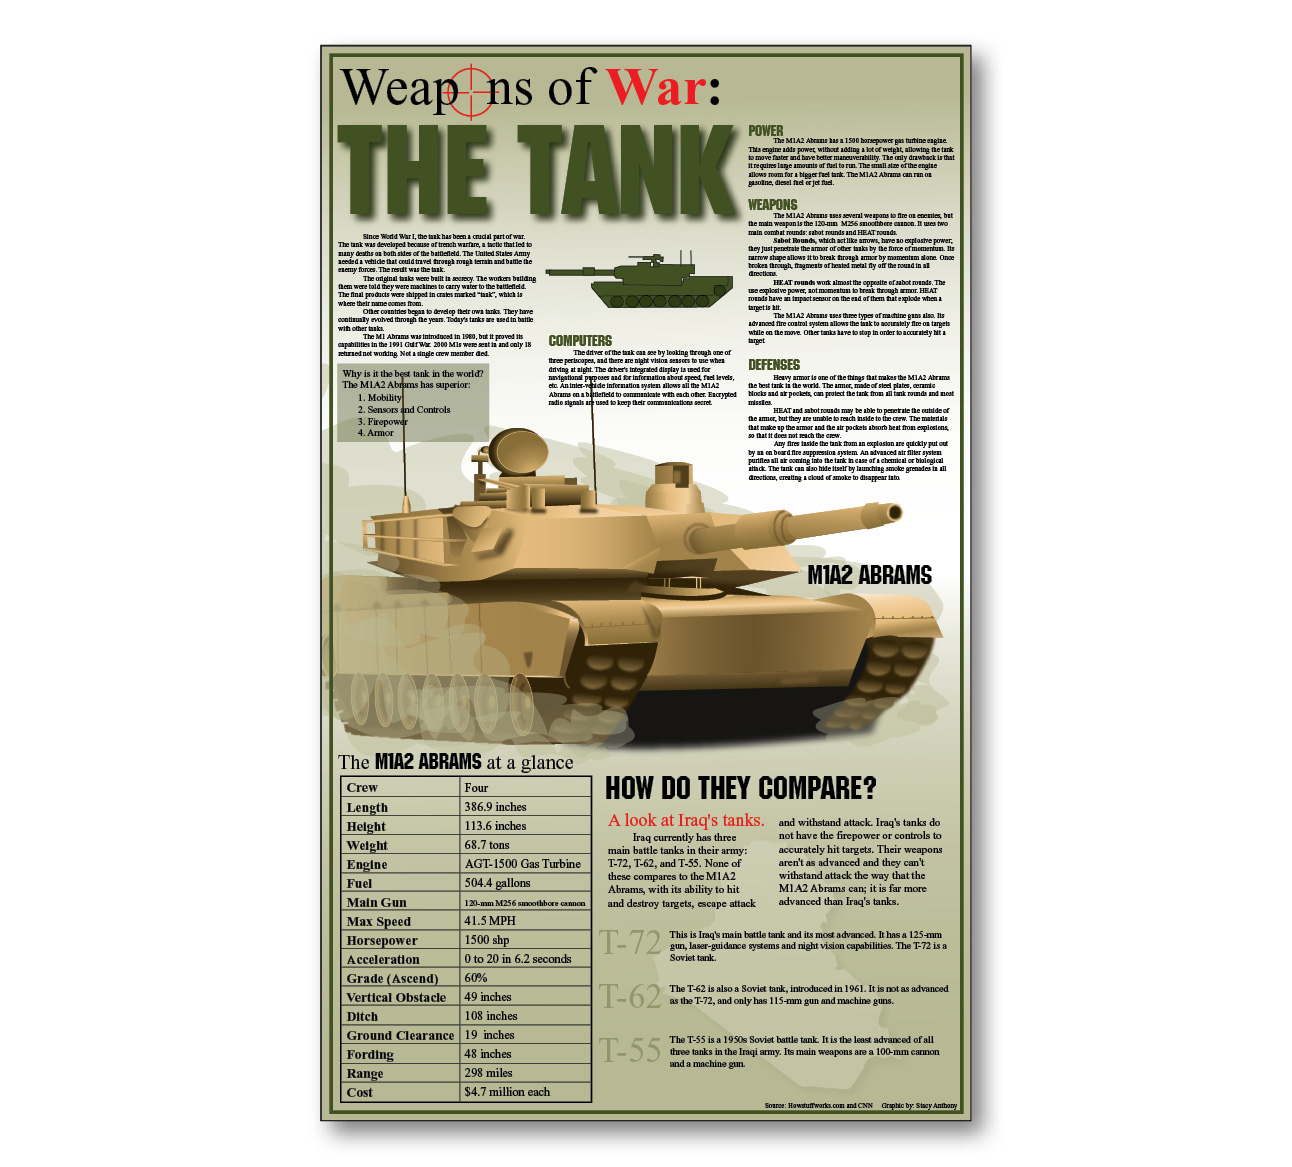 Since world war 1, the tank has been a crucial part of war. The tank was developed because of trench warfire, a battle that led to many deaths on both […]